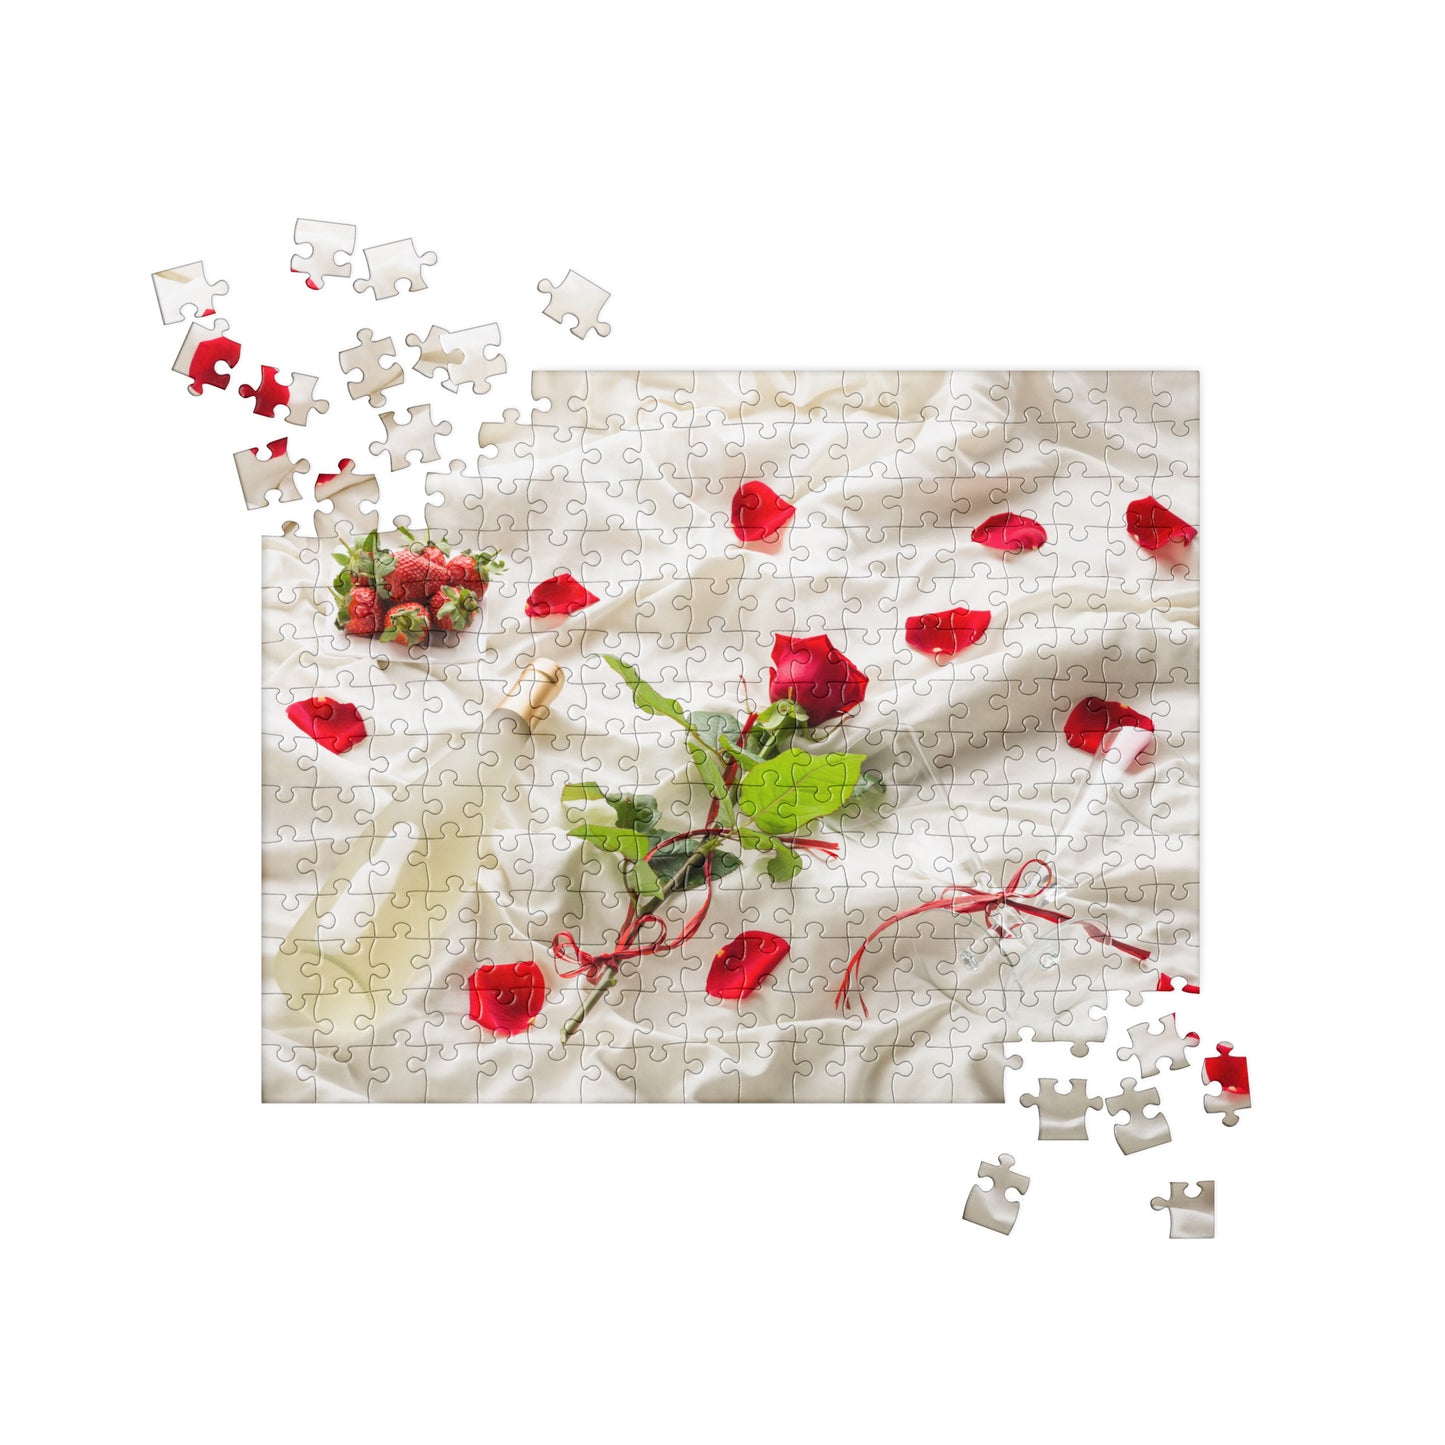 Sensual Jigsaw Puzzle: Rose Petals & Champagne on Bed